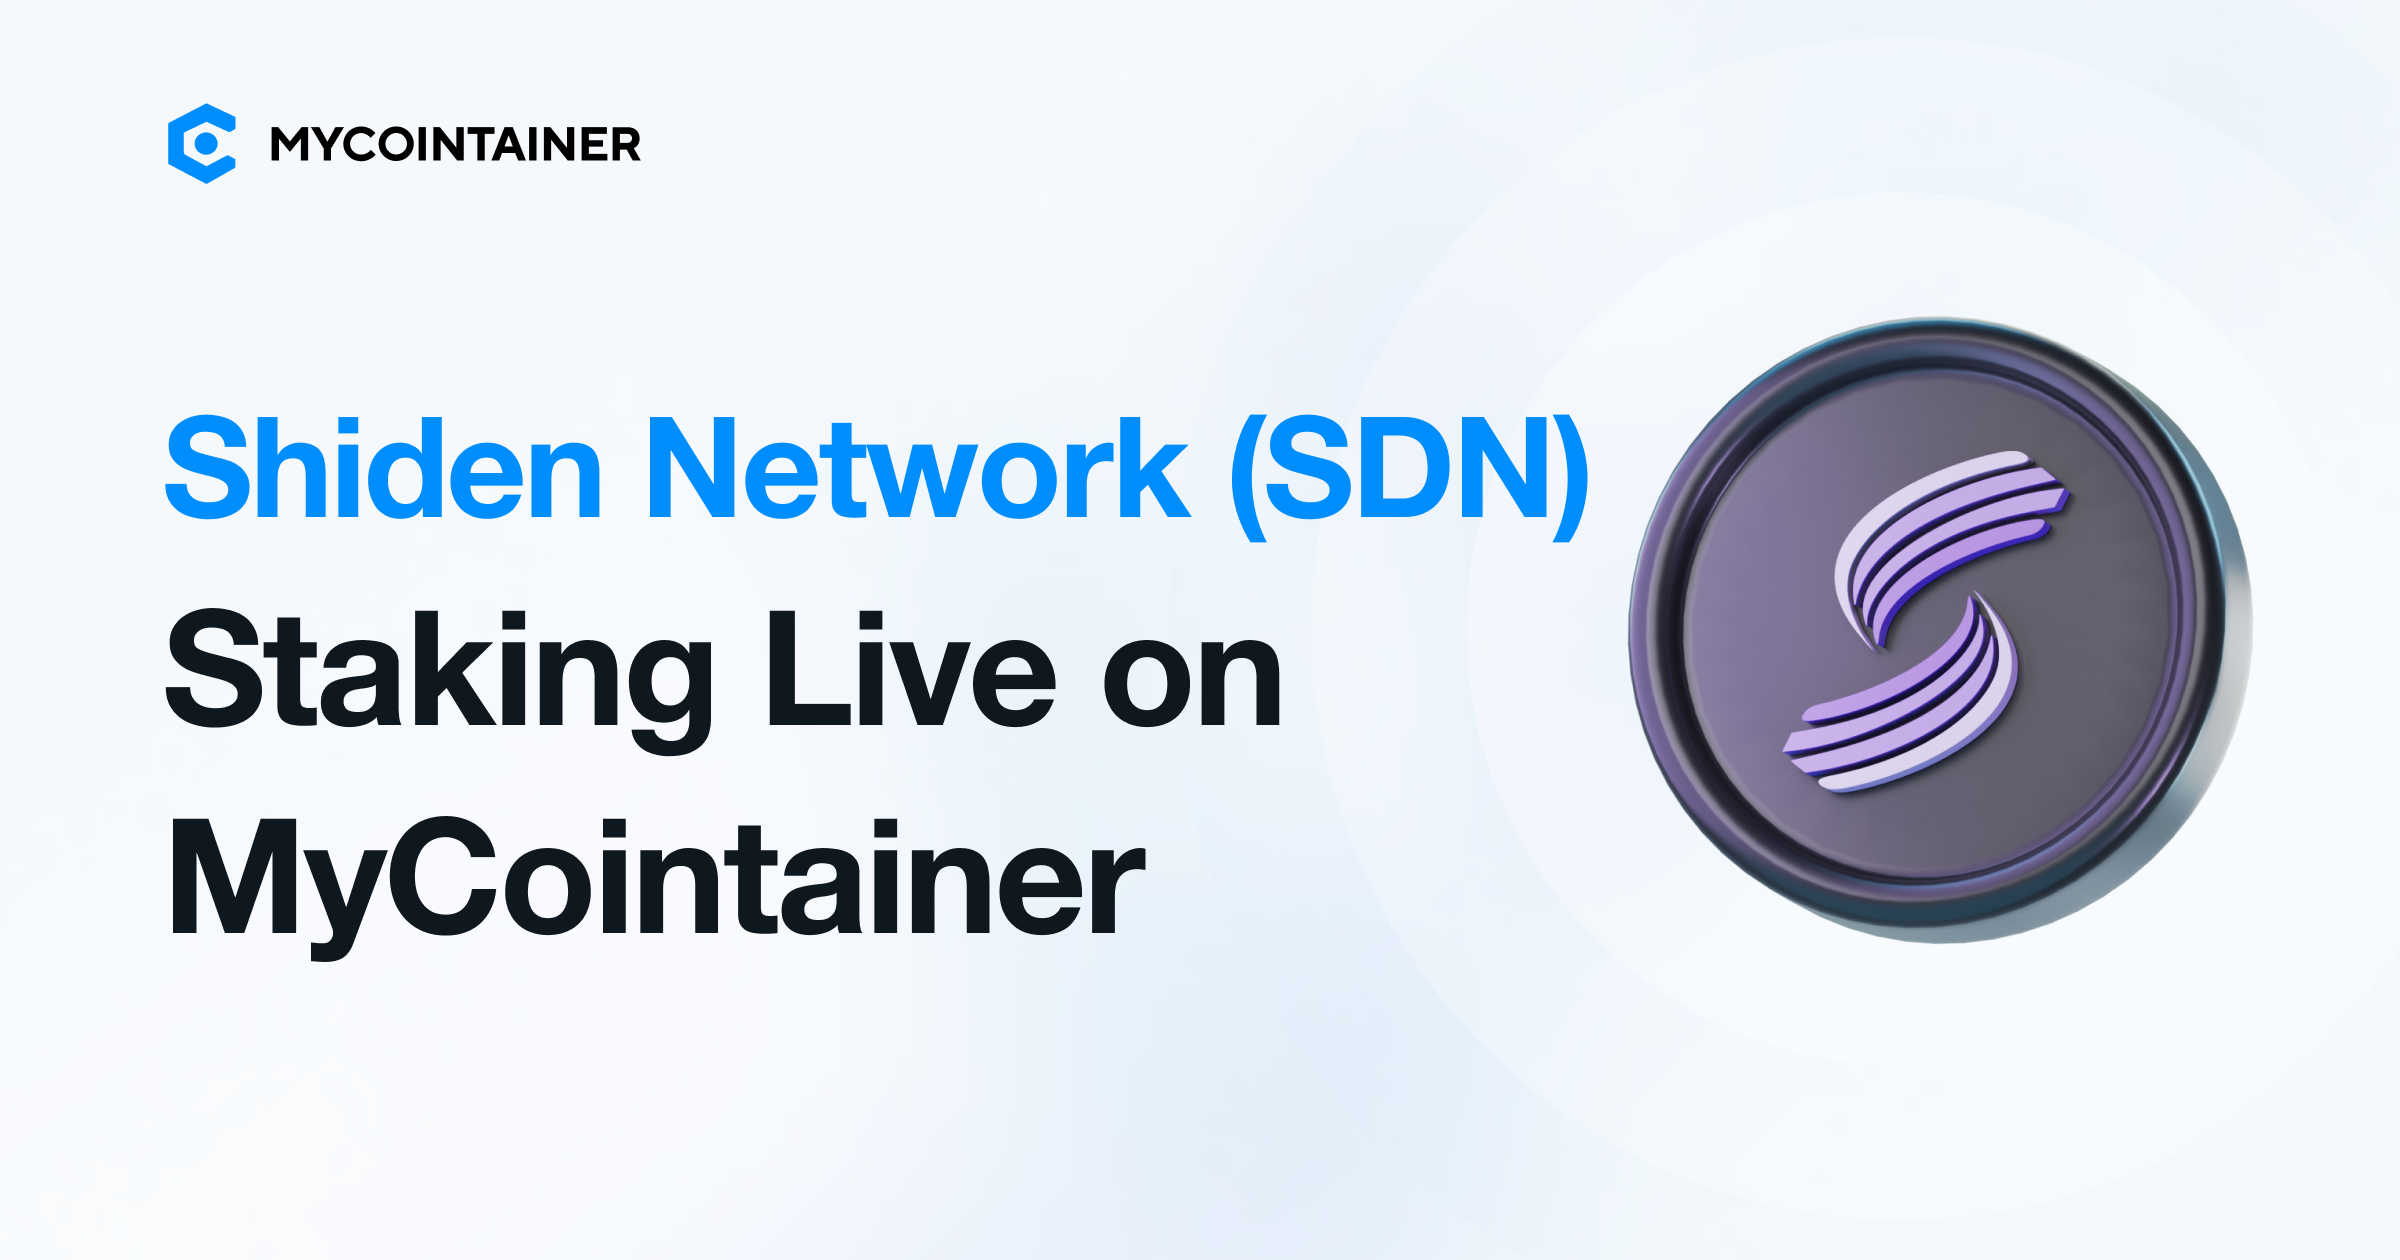 Stake Shiden Network (SDN) on MyCointainer